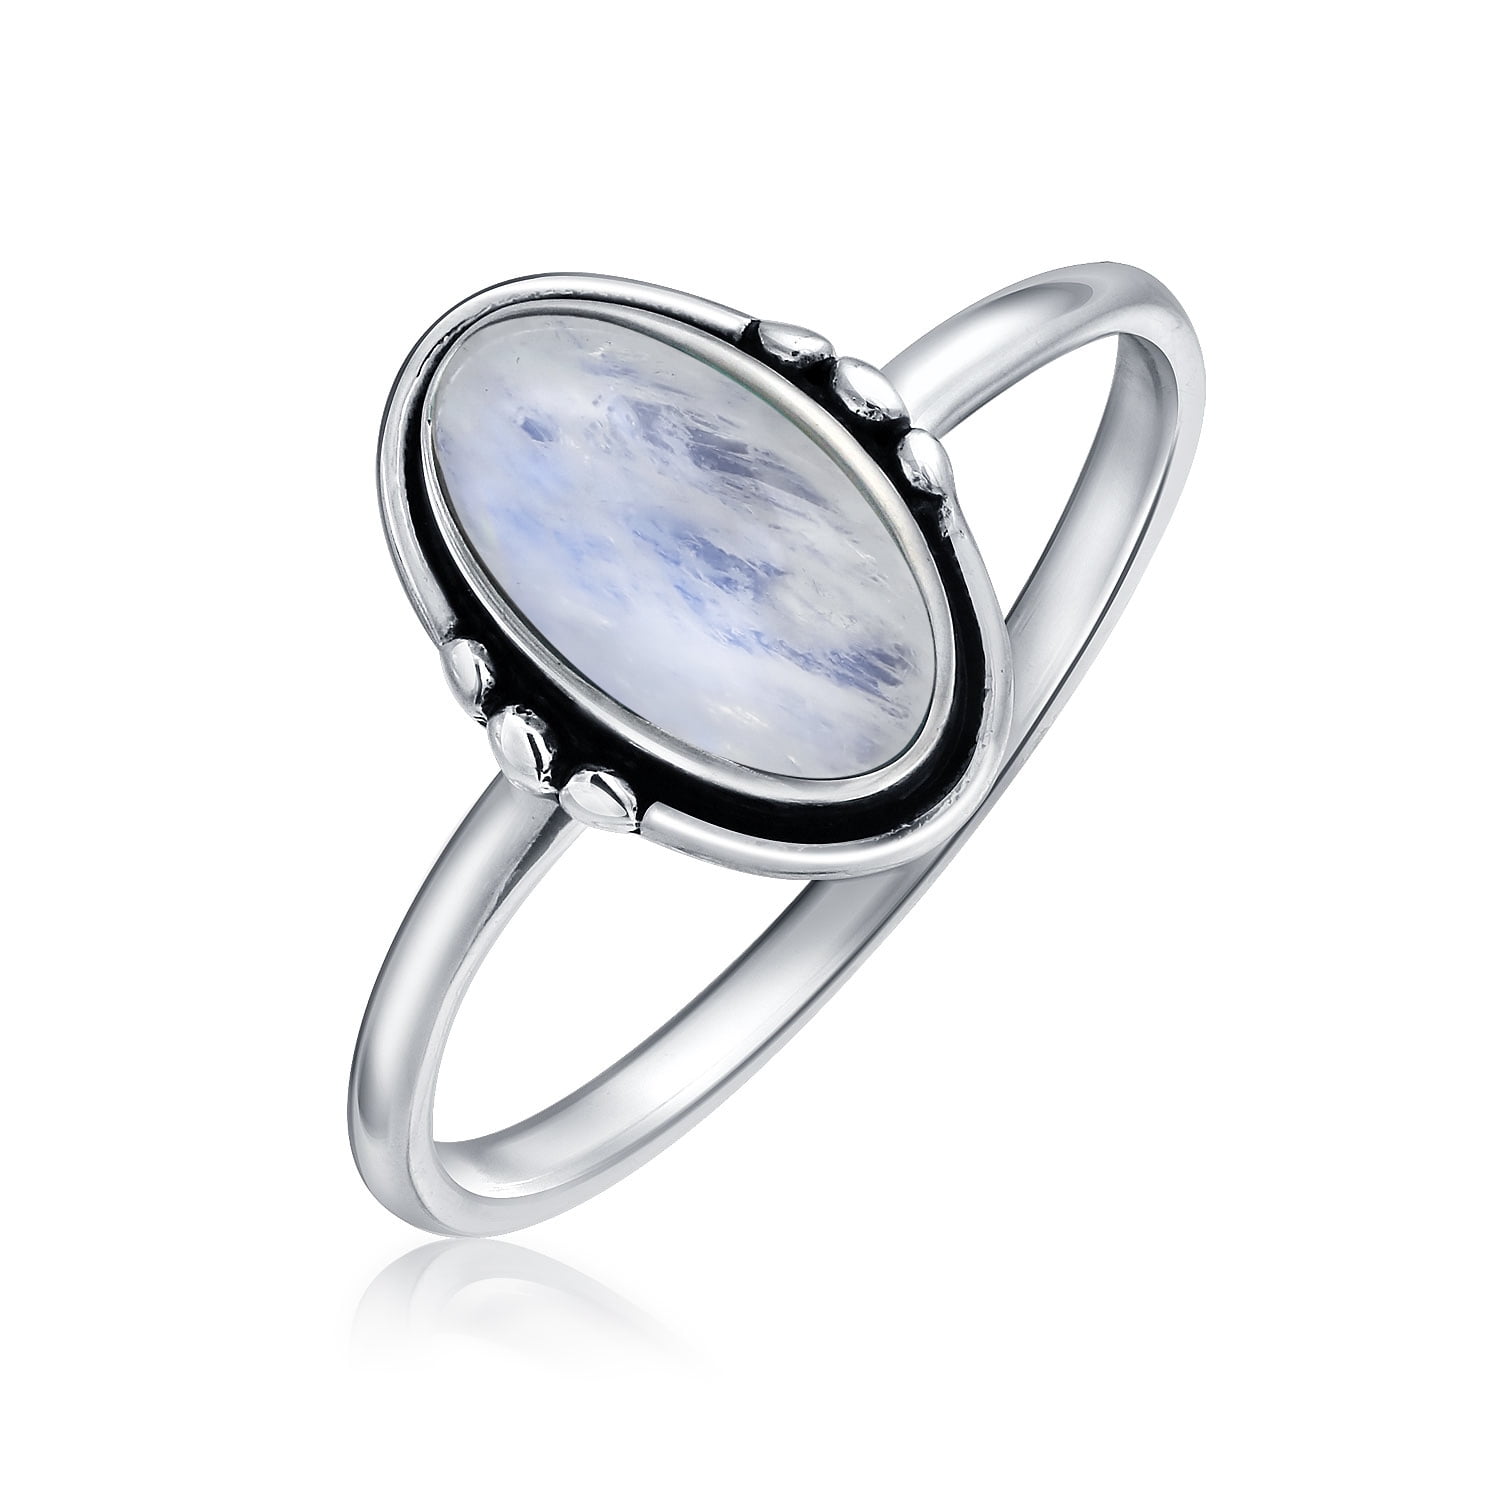 Casual Wear Cabochon Christmas Gift White Stone Ring Natural Gemstone Gift Bezel Ring Sterling Silver Ring Christmas Moonstone Ring